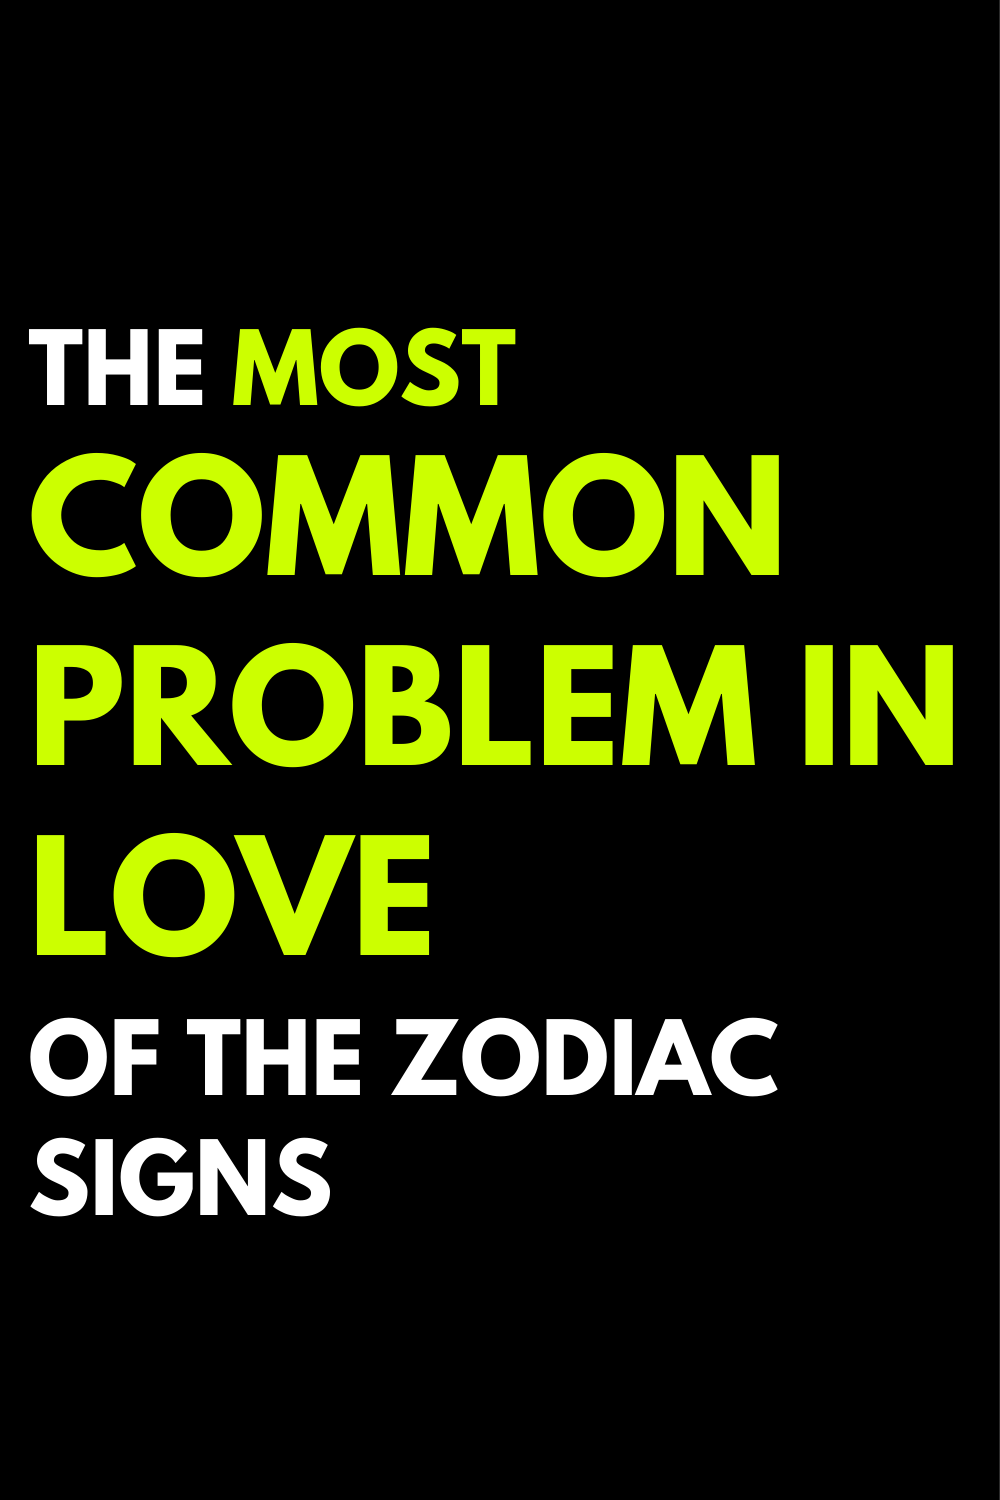 The most common problem in love of the zodiac signs